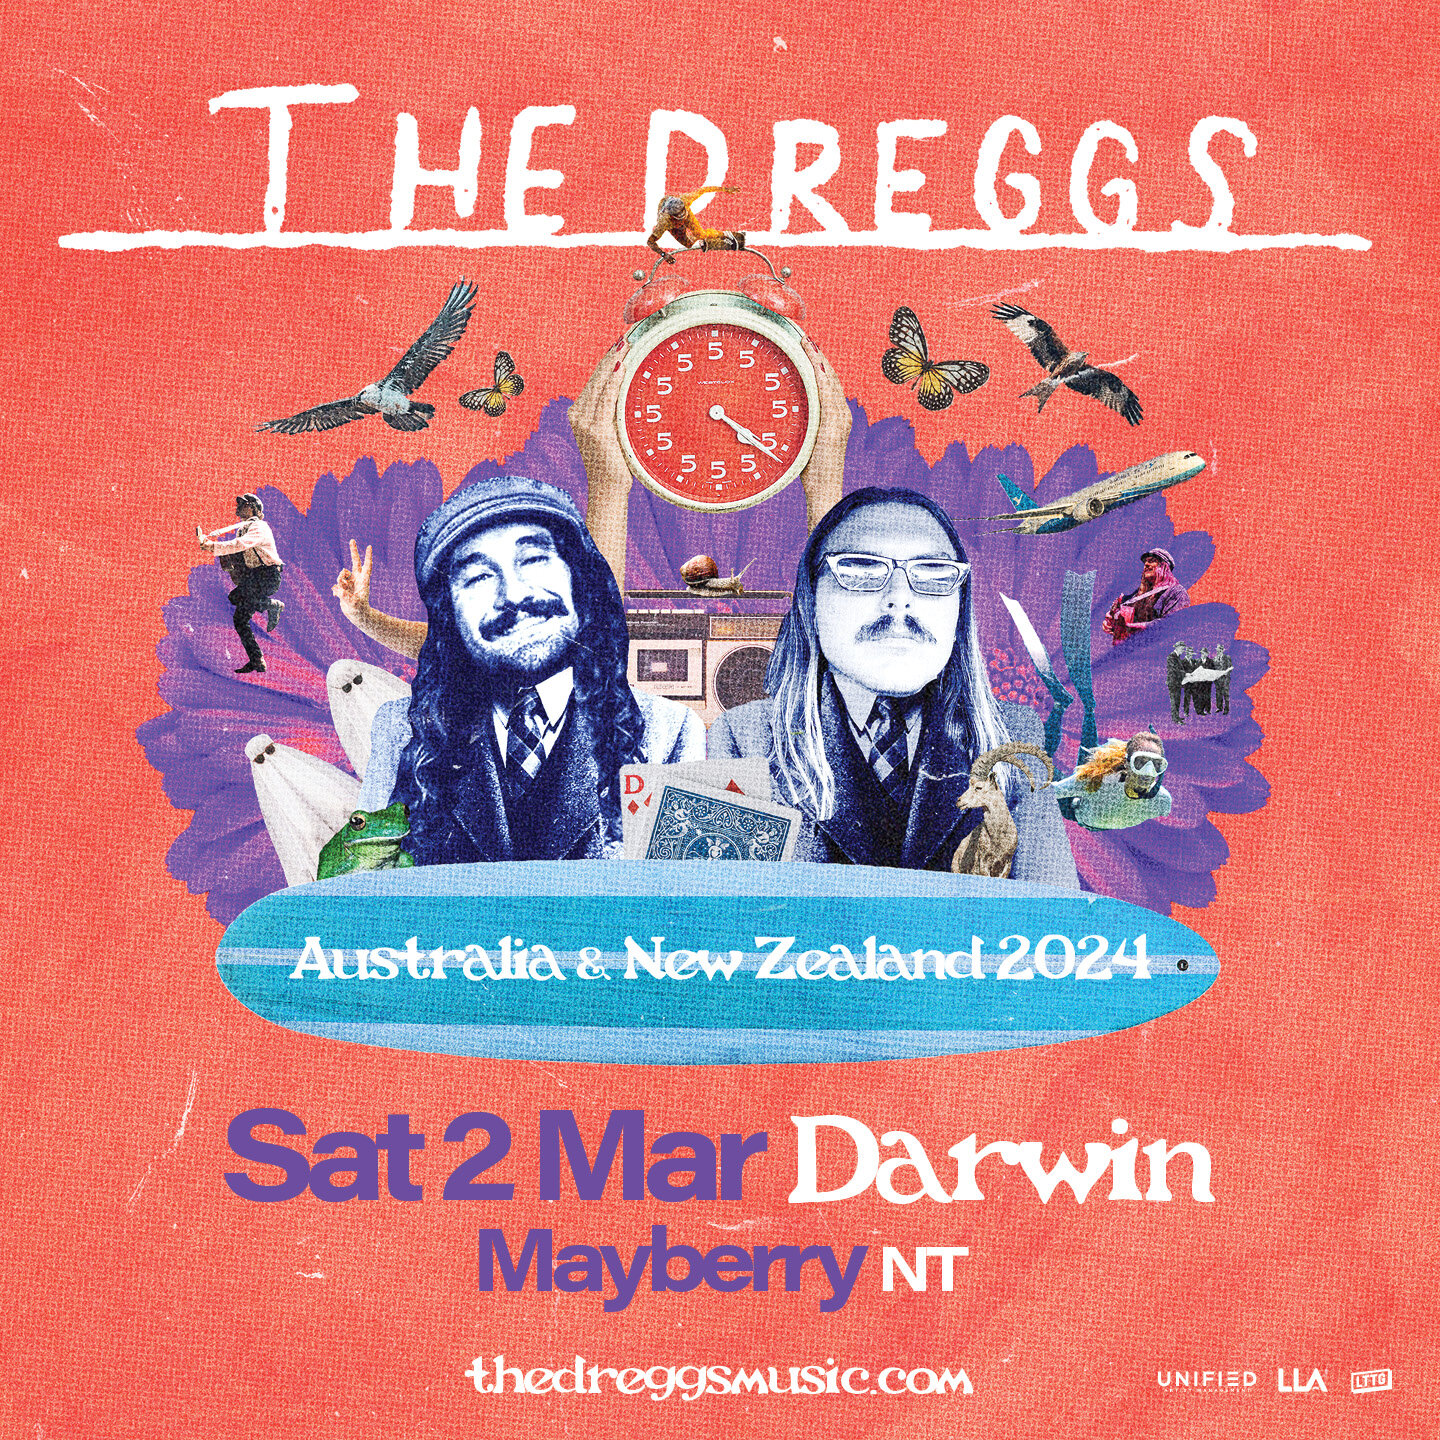 🌊 The Dreggs live @ Mayberry - Saturday 2nd March 2024 🌊 

From humble beginnings as a local cover act, The Dreggs have skyrocketed to performing on stages at Spilt Milk, Queenscliff Music Festival and NYE on the Hill and have sold over 10,000 tick